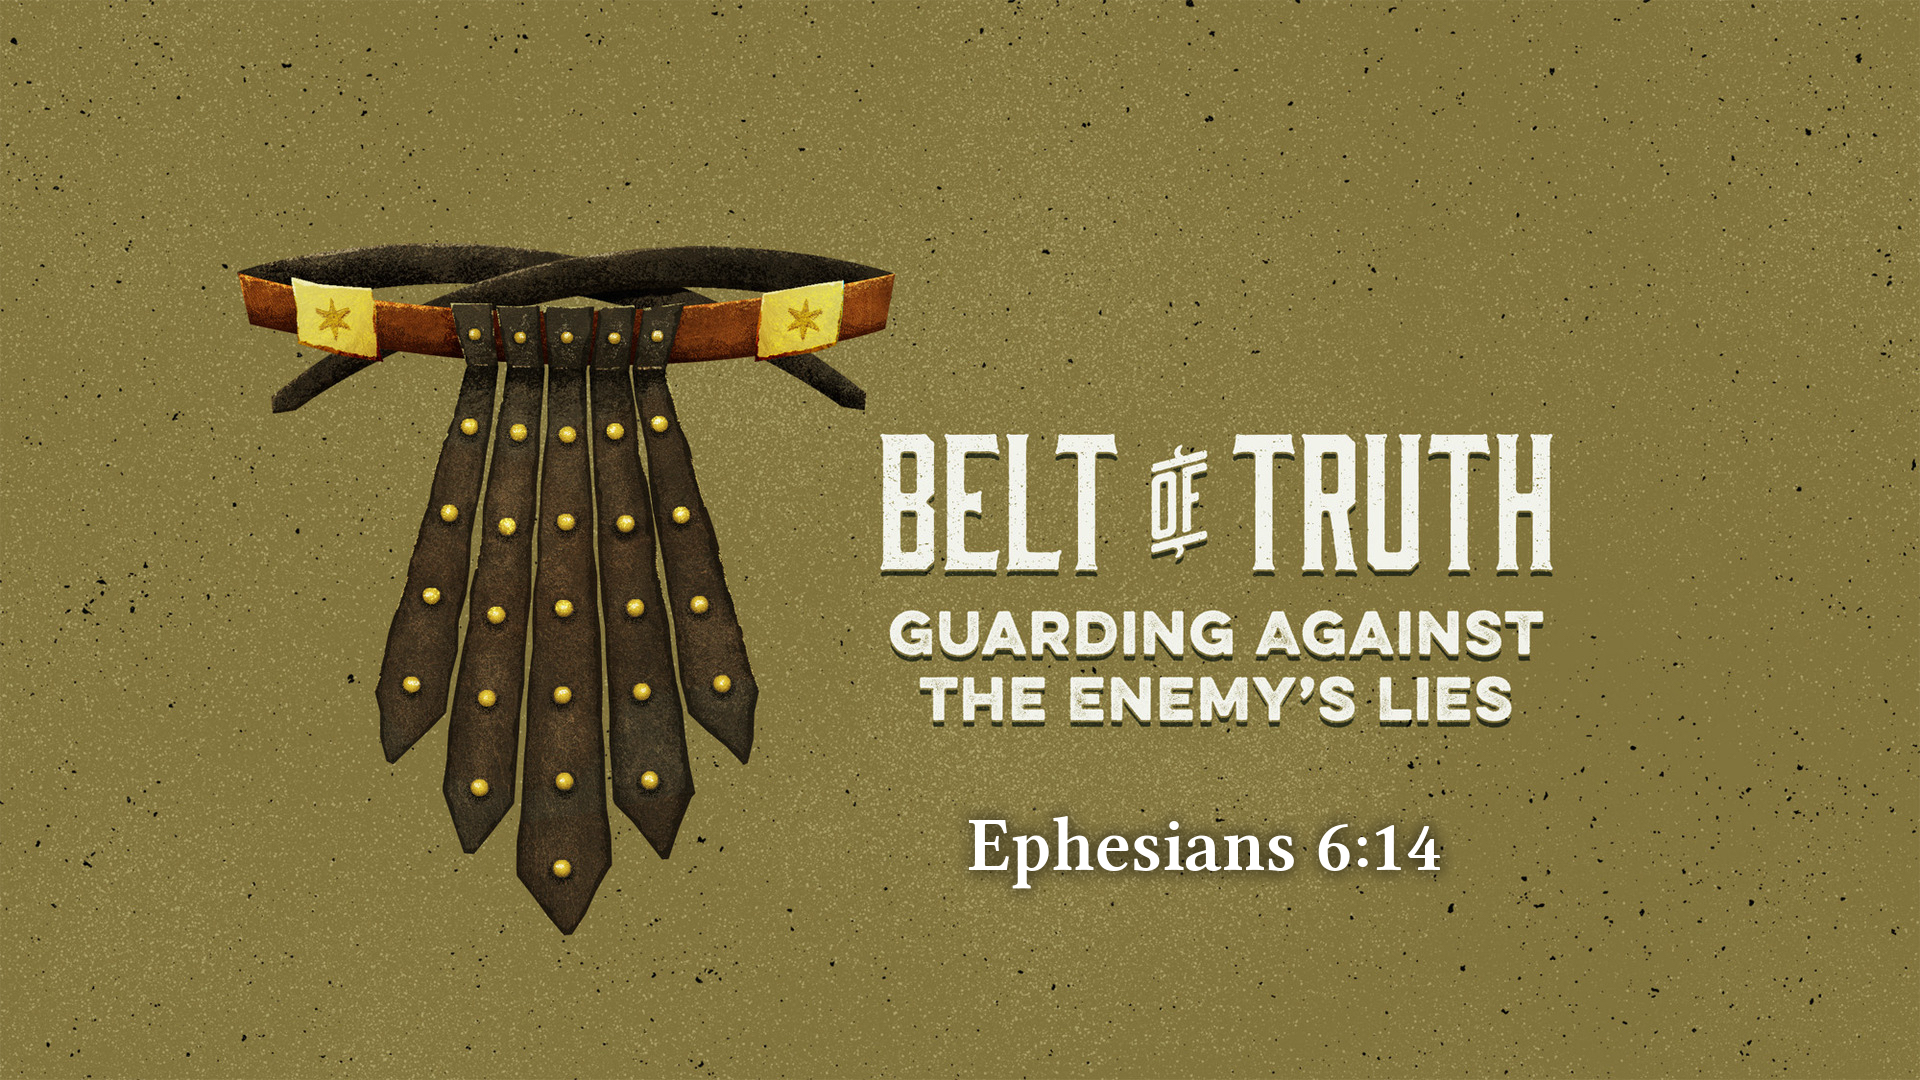 0 - 21.10.17a - The Belt of Truth - Ephesians 6.14.png